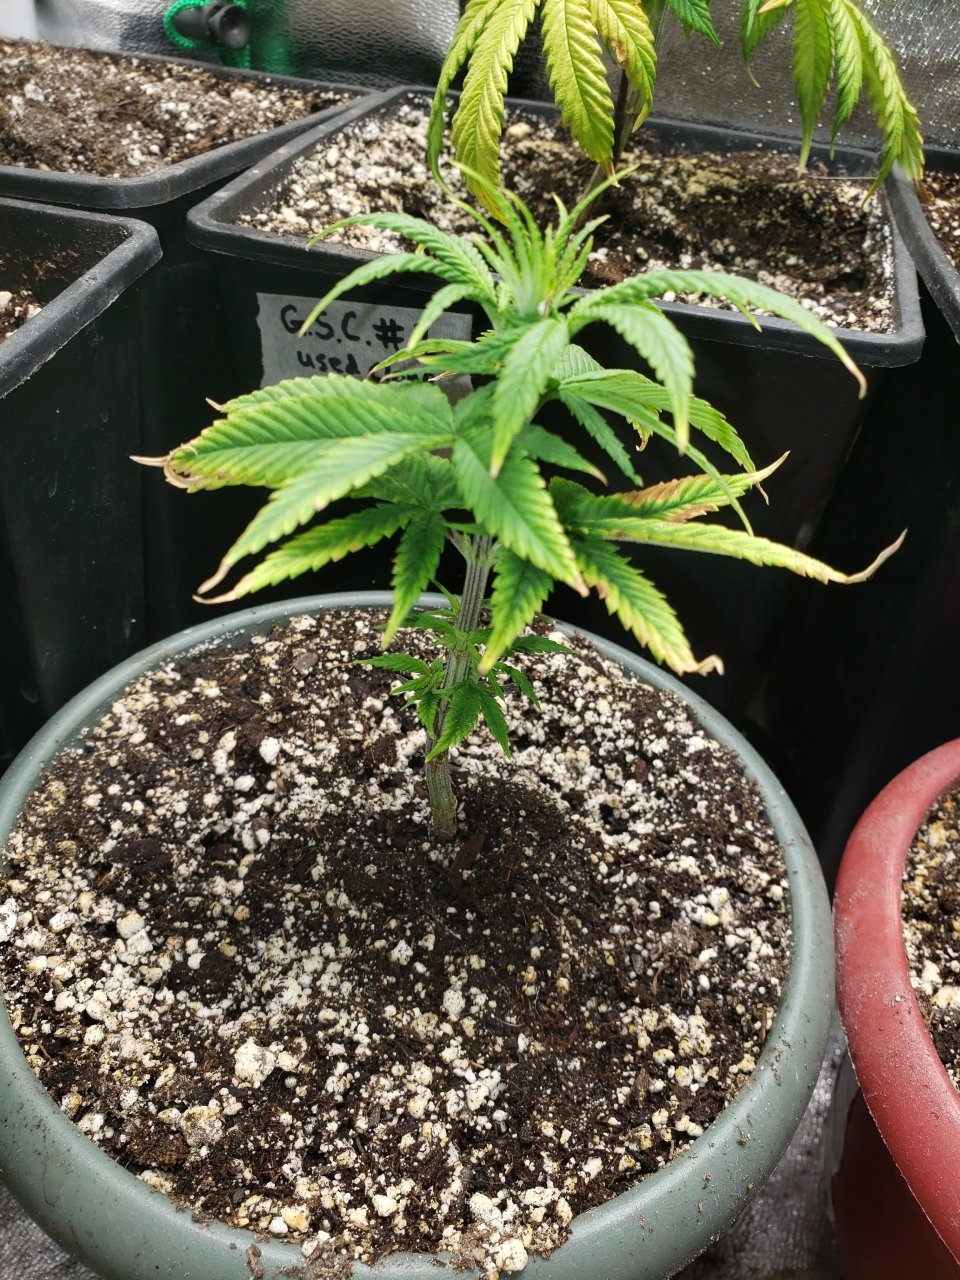 GSC clone 26 days old should I keep it?